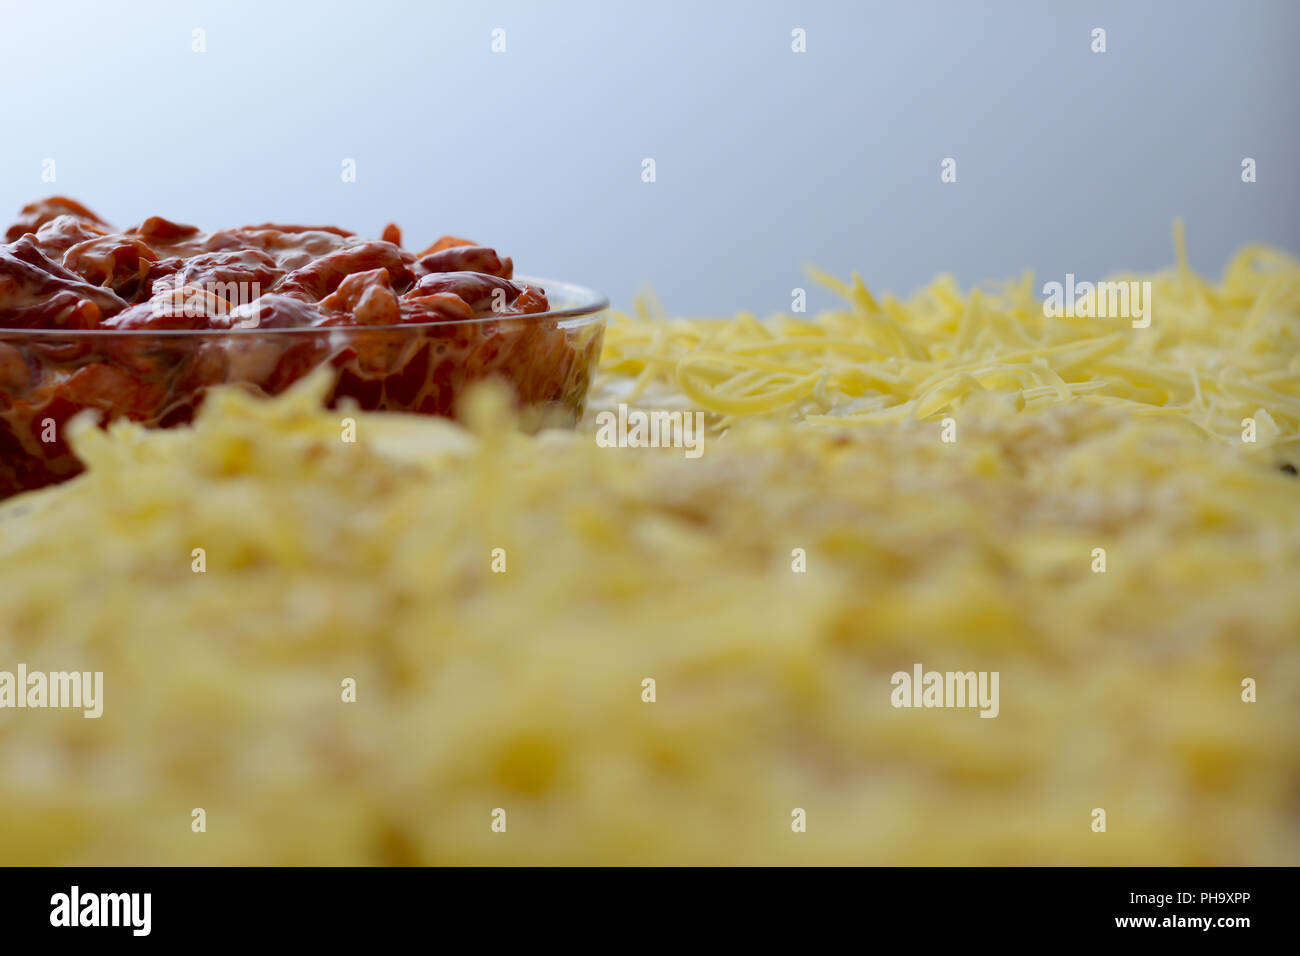 Close up of salt cake with yellow cheese Stock Photo